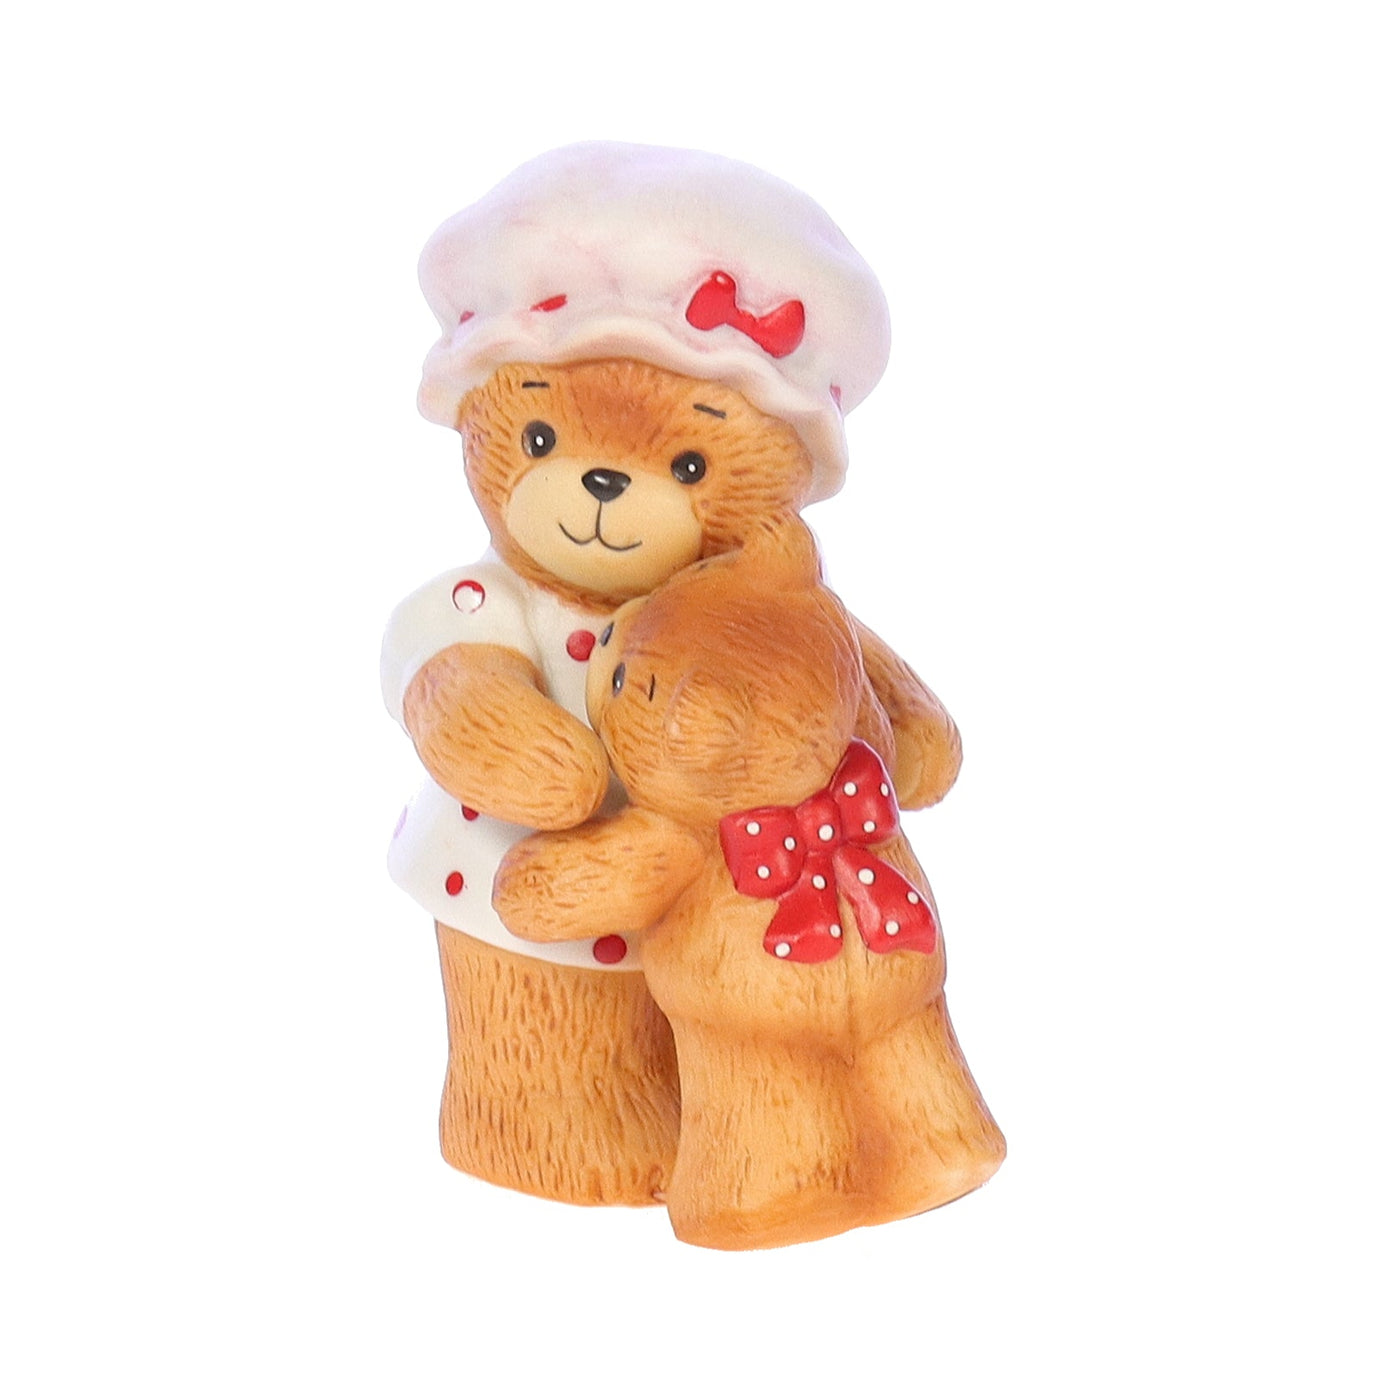 Lucy_and_Me_Mother_Bear_Hugging_Baby_Family_Figurine_1980